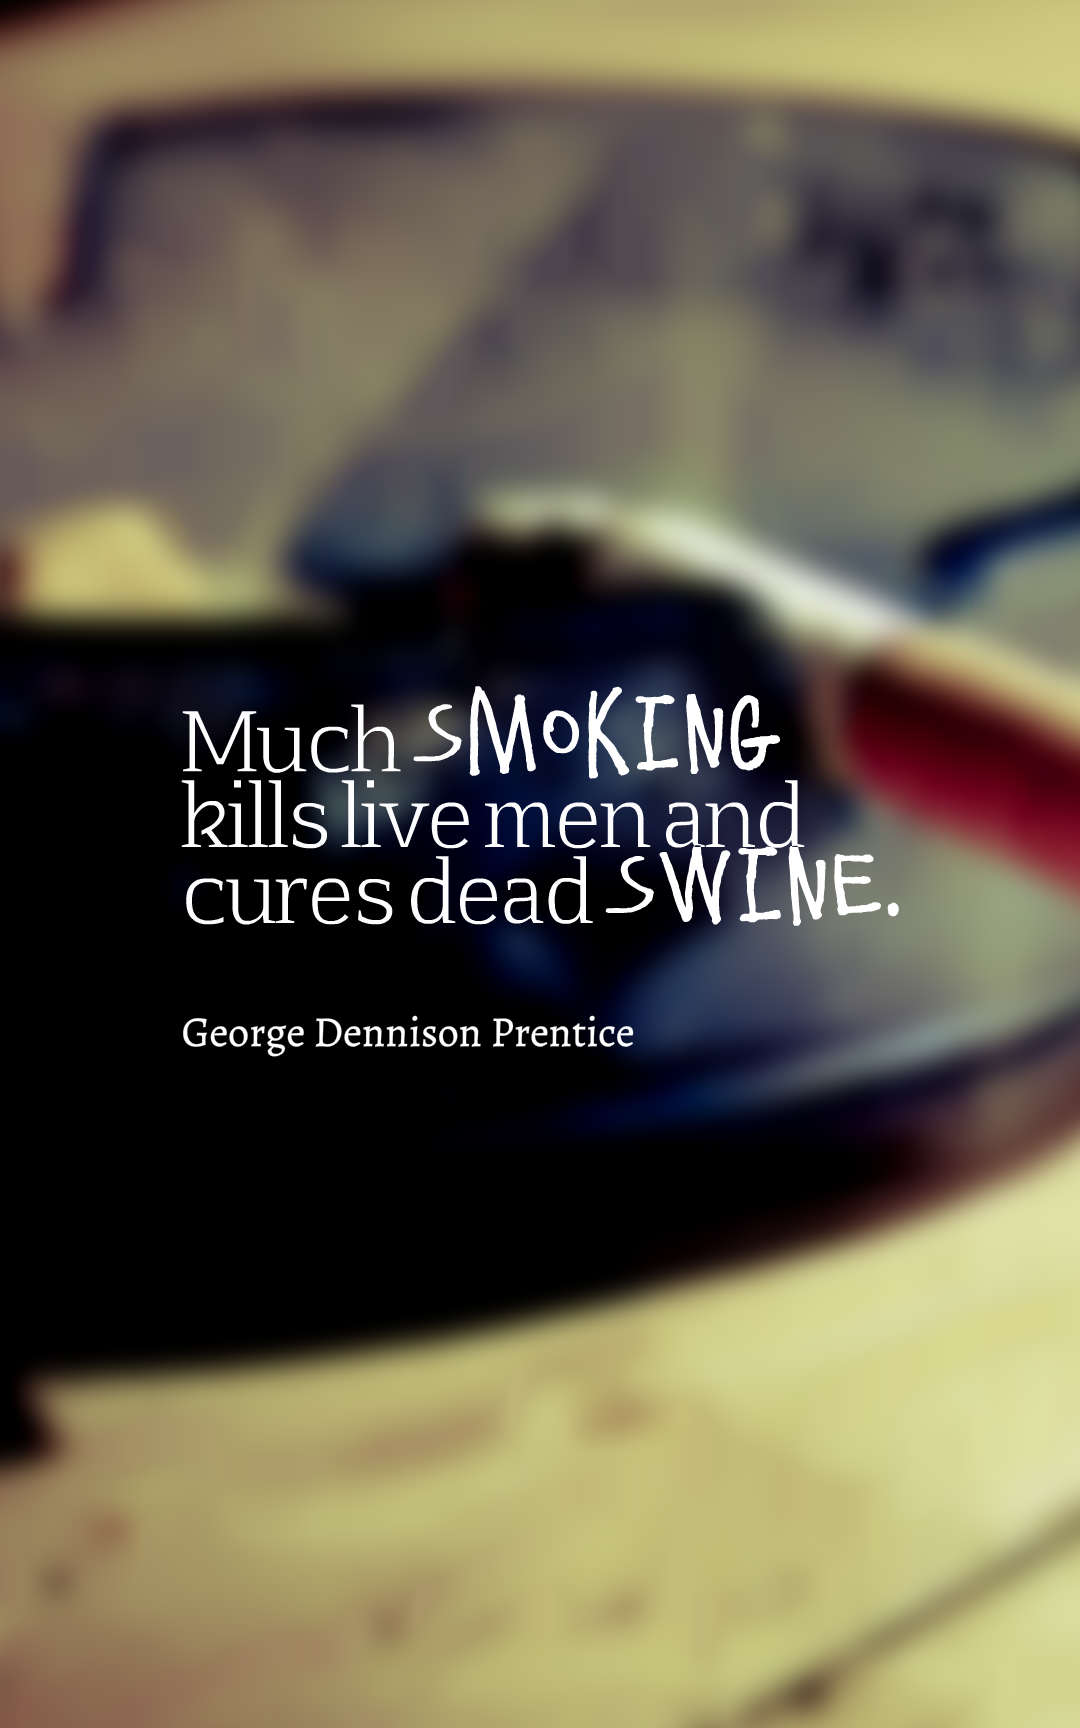 Much smoking kills live men and cures dead swine.